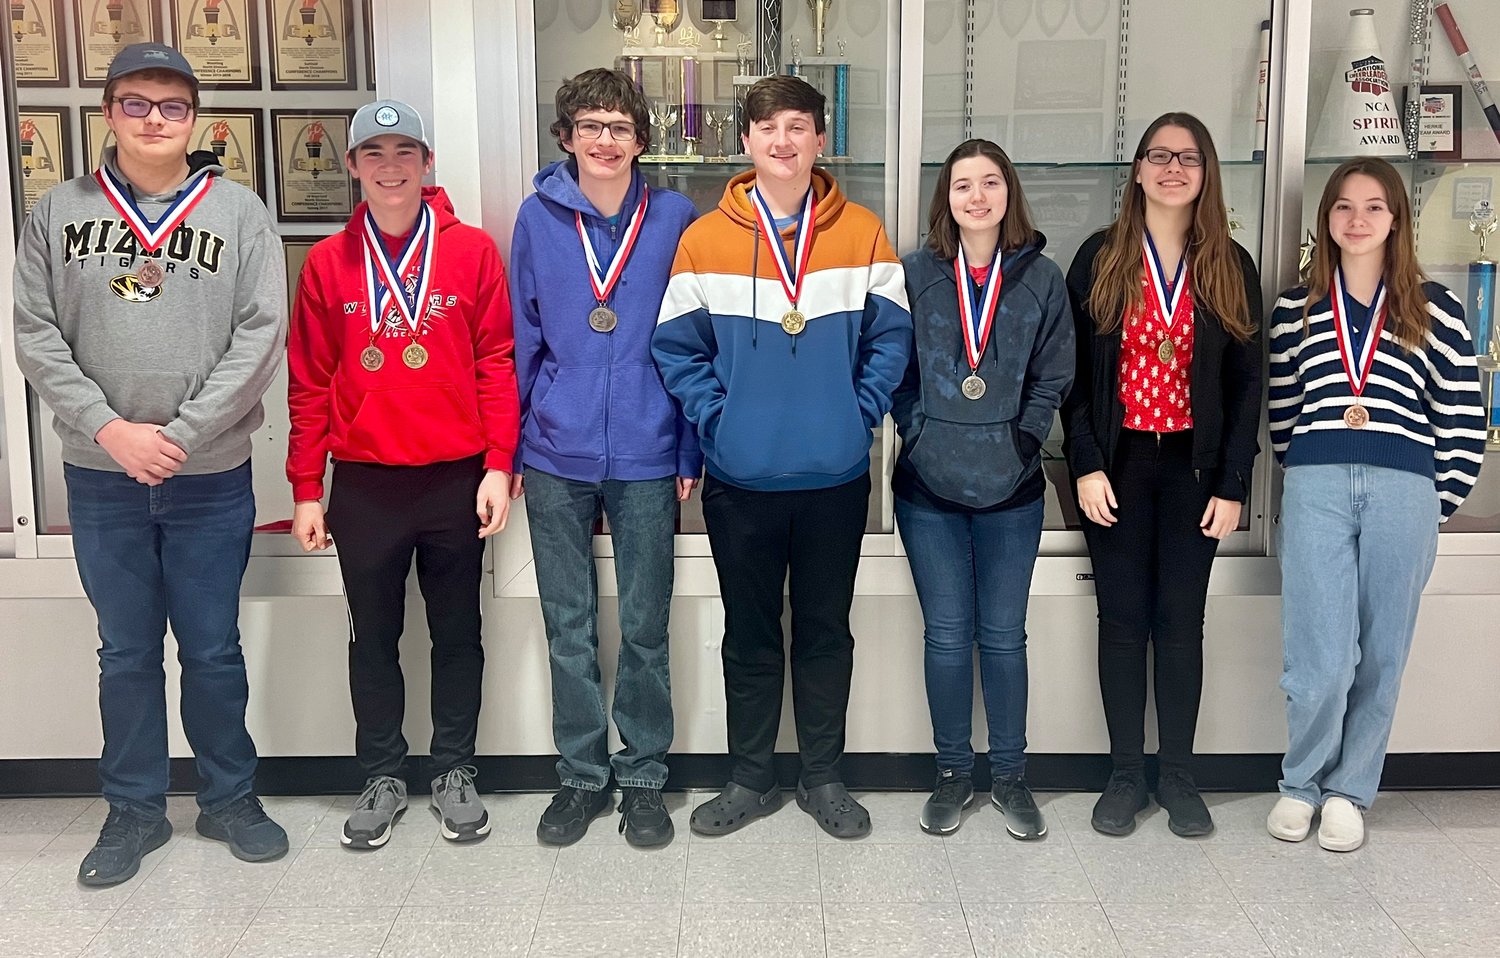 WARRENTON MEDALISTS — Seven of eight Warrenton Academic Challenge regional medalists pose with their medals. Pictured are, from left: Grant Buechner, Owen Thompson, Roy Briggs, Luke Rausch, Katie Shramek, Alice Briggs and Abby Palmer. Not pictured: Merrick Owens.